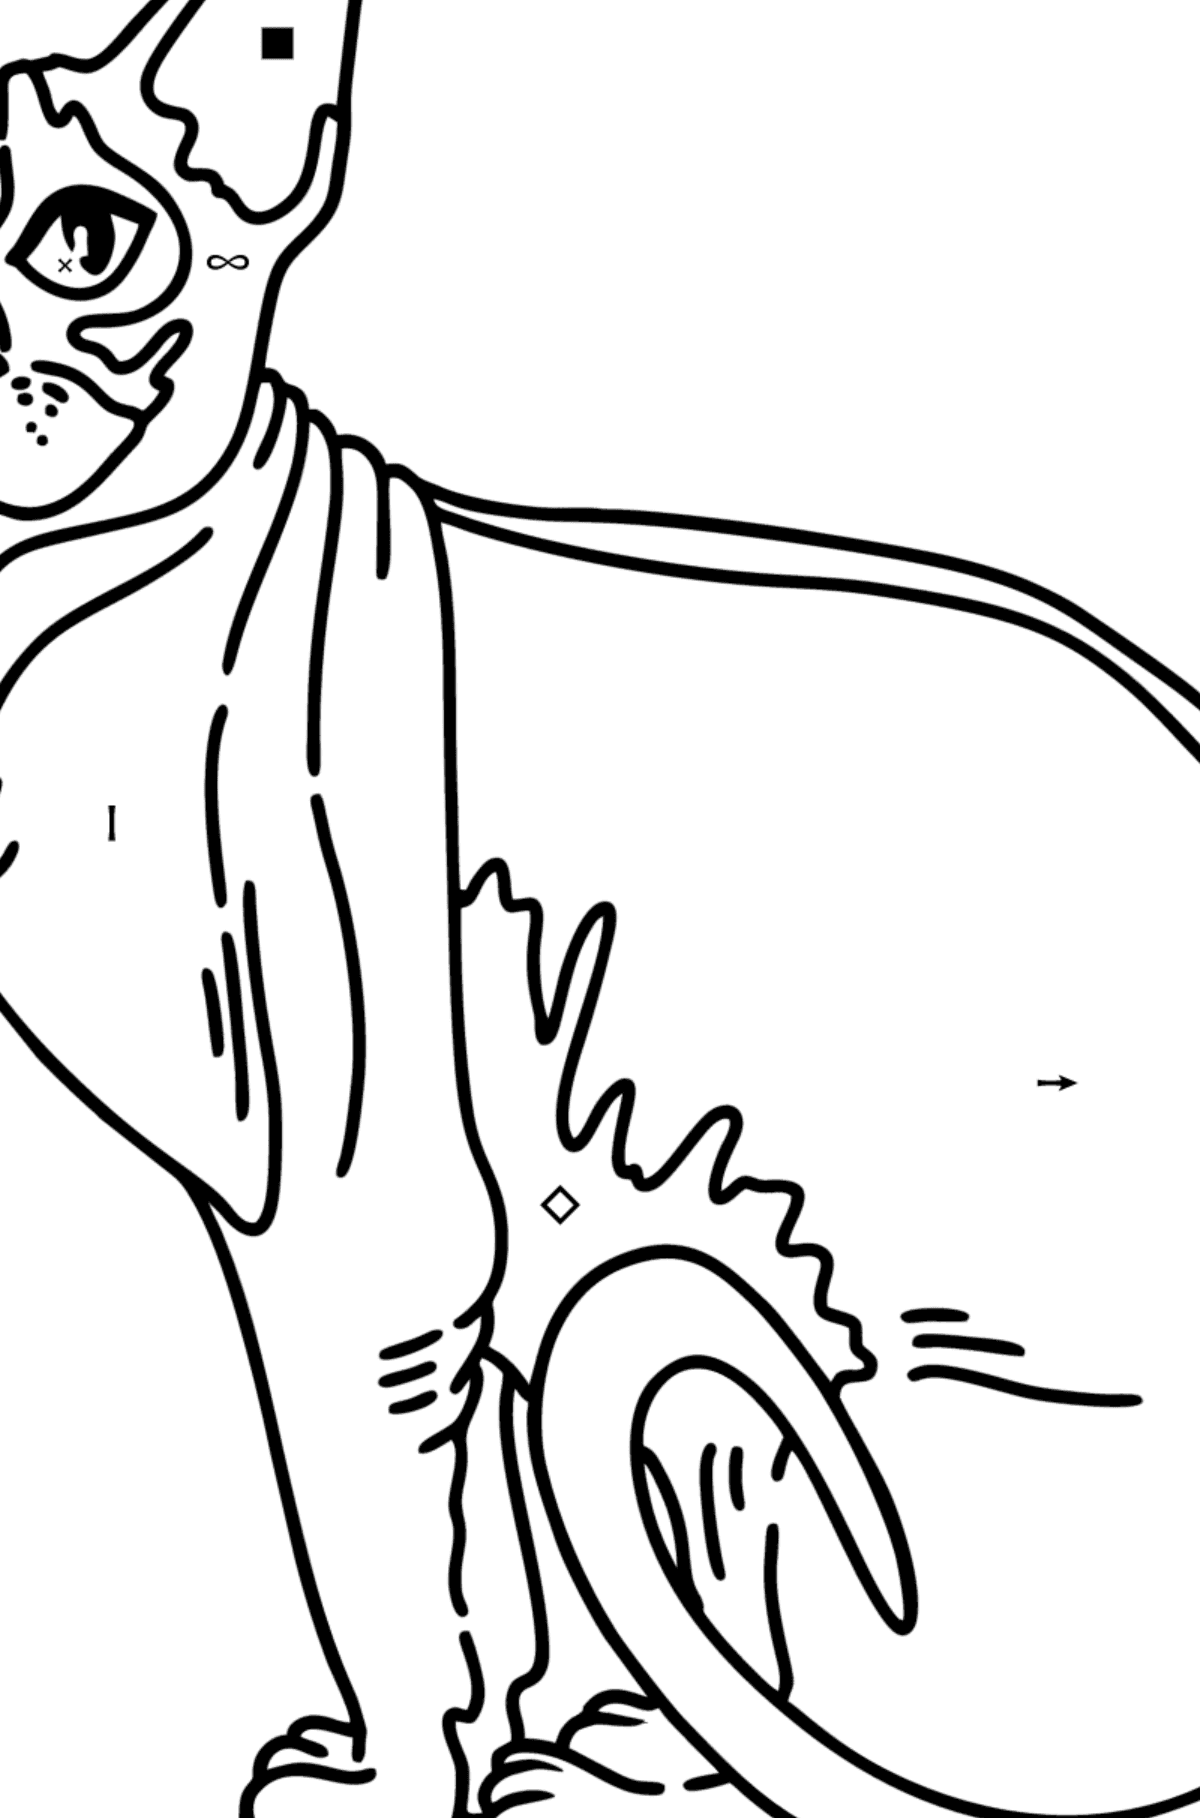 Sphynx Cat coloring page - Coloring by Symbols for Kids